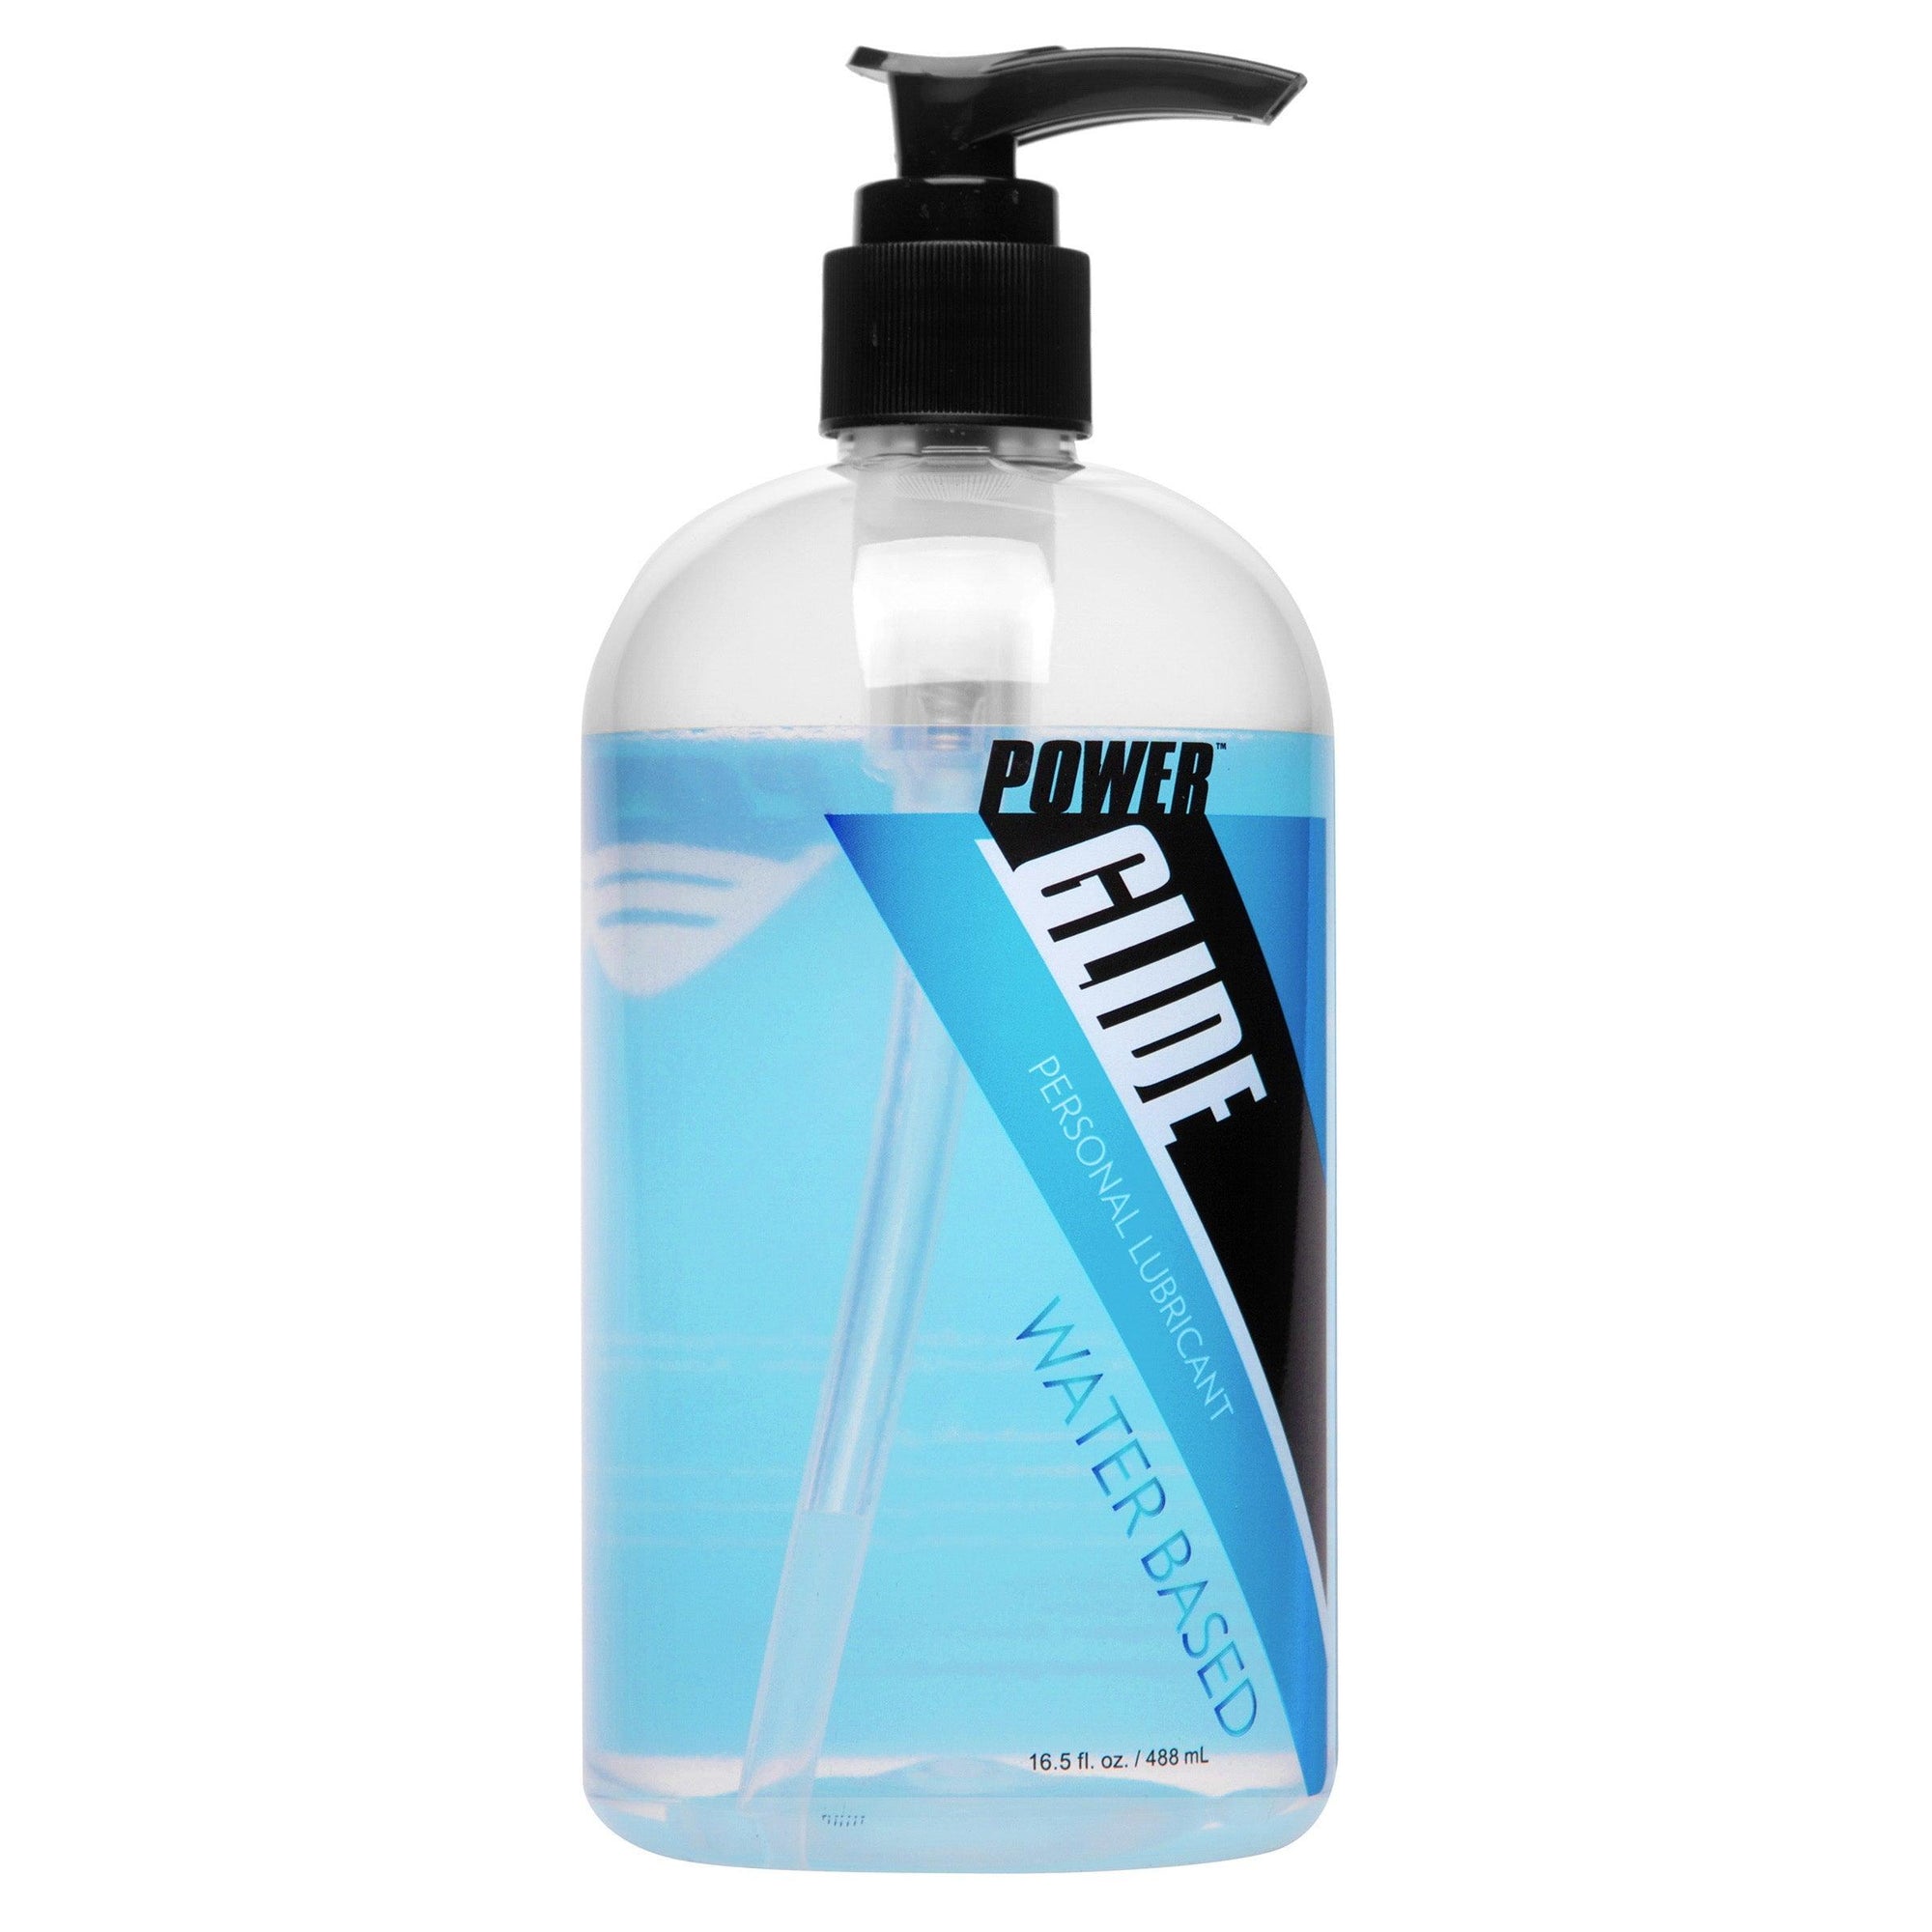 Power Glide Water Based Personal Lubricant- 16.5 oz